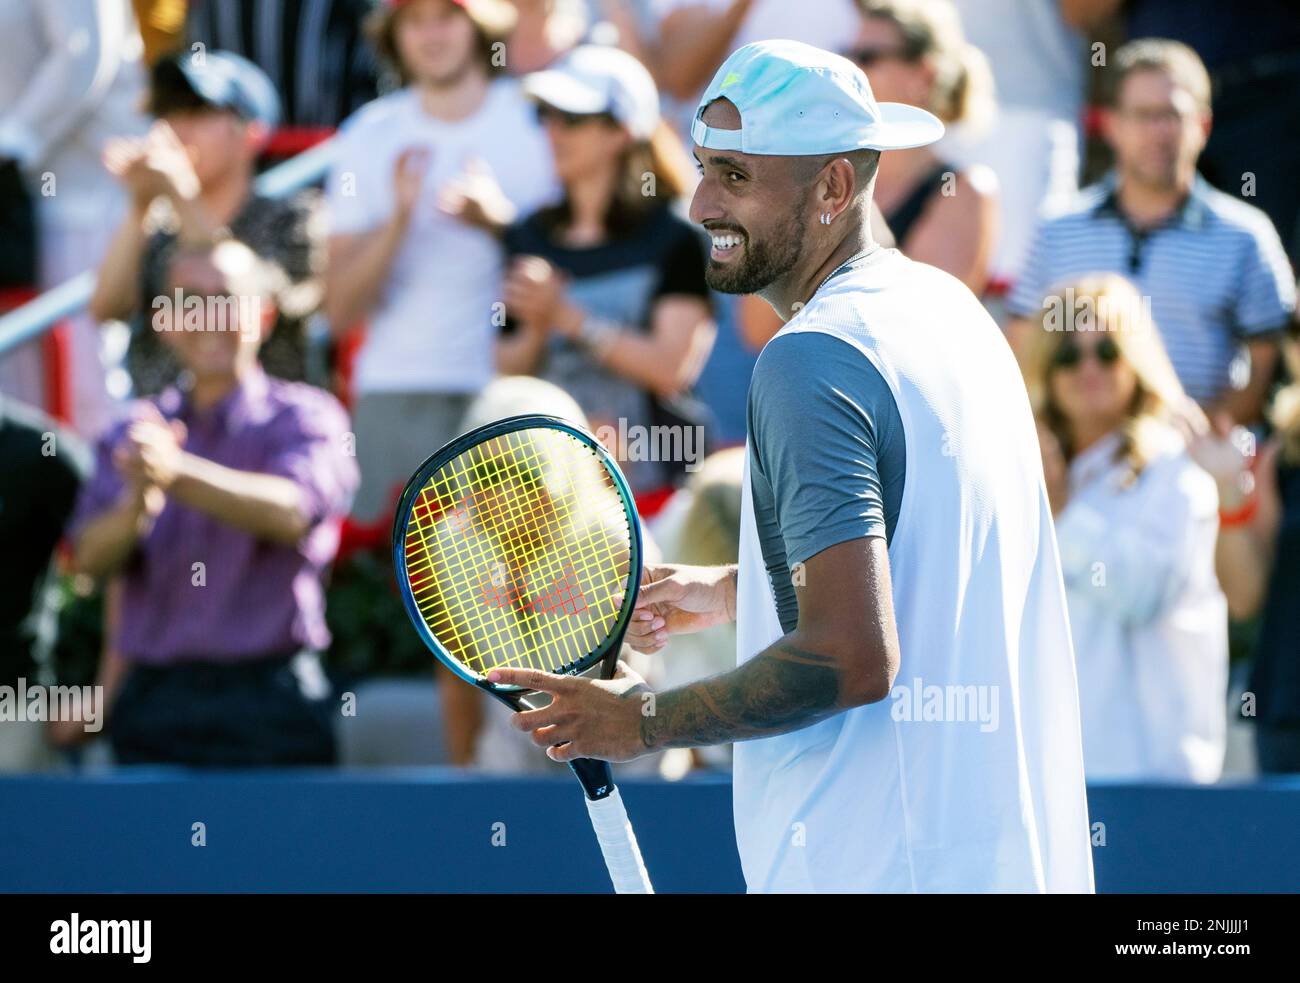 Nick Kyrgios of Australia celebrates his victory over Daniil Medvedev during second round play at the National Bank Open tennis tournament Wednesday Aug. 10, 2022